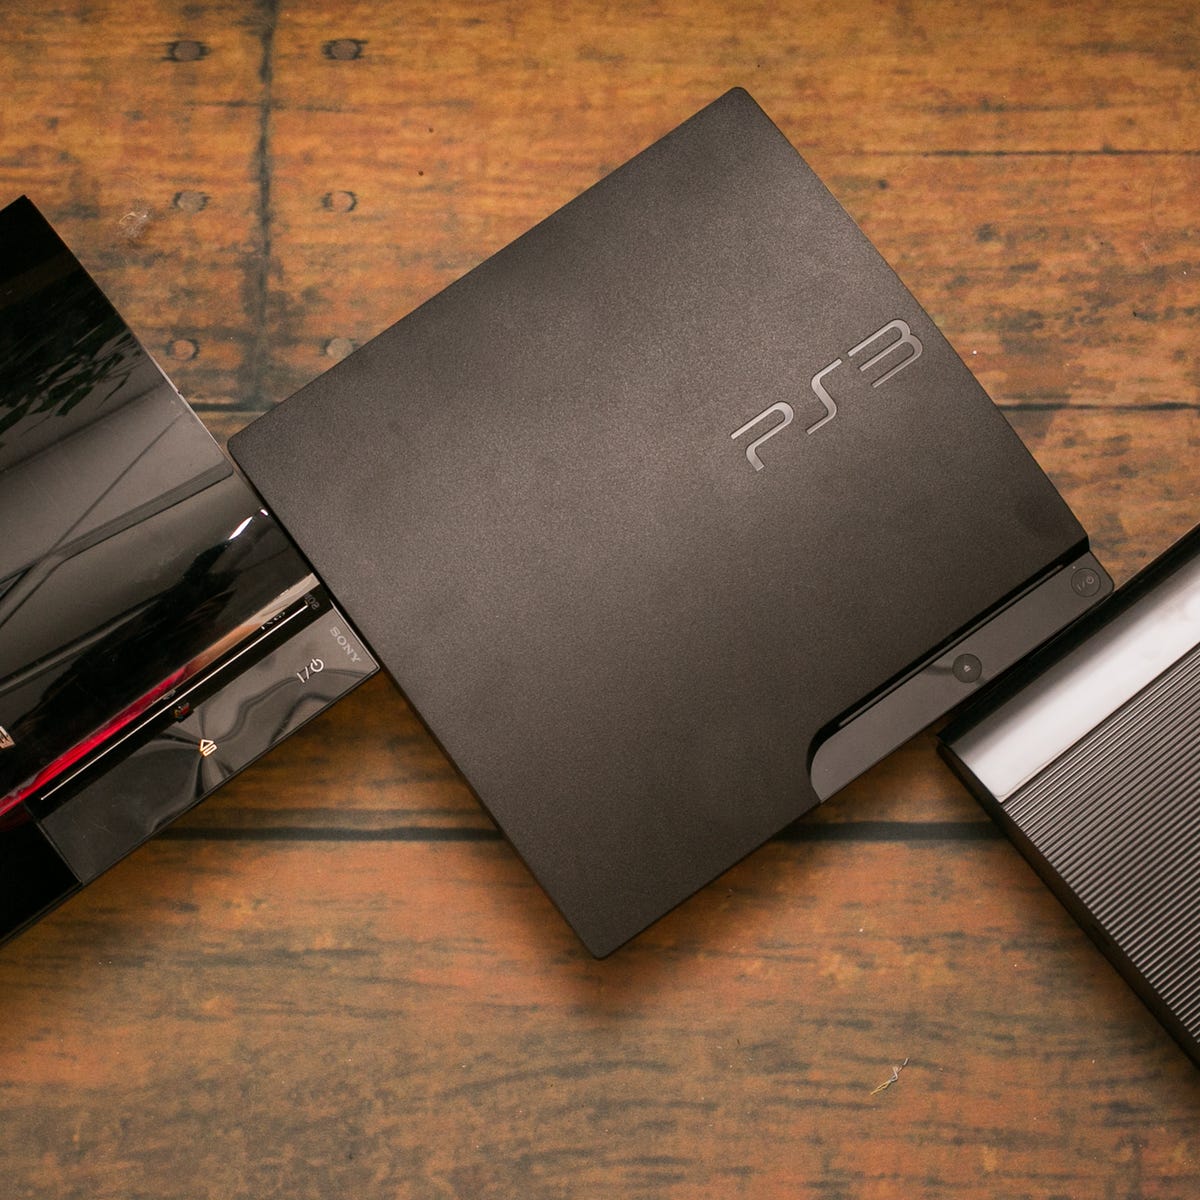 Sony PlayStation Slim review: Sony shrinks new PS3 -- except for the price - CNET